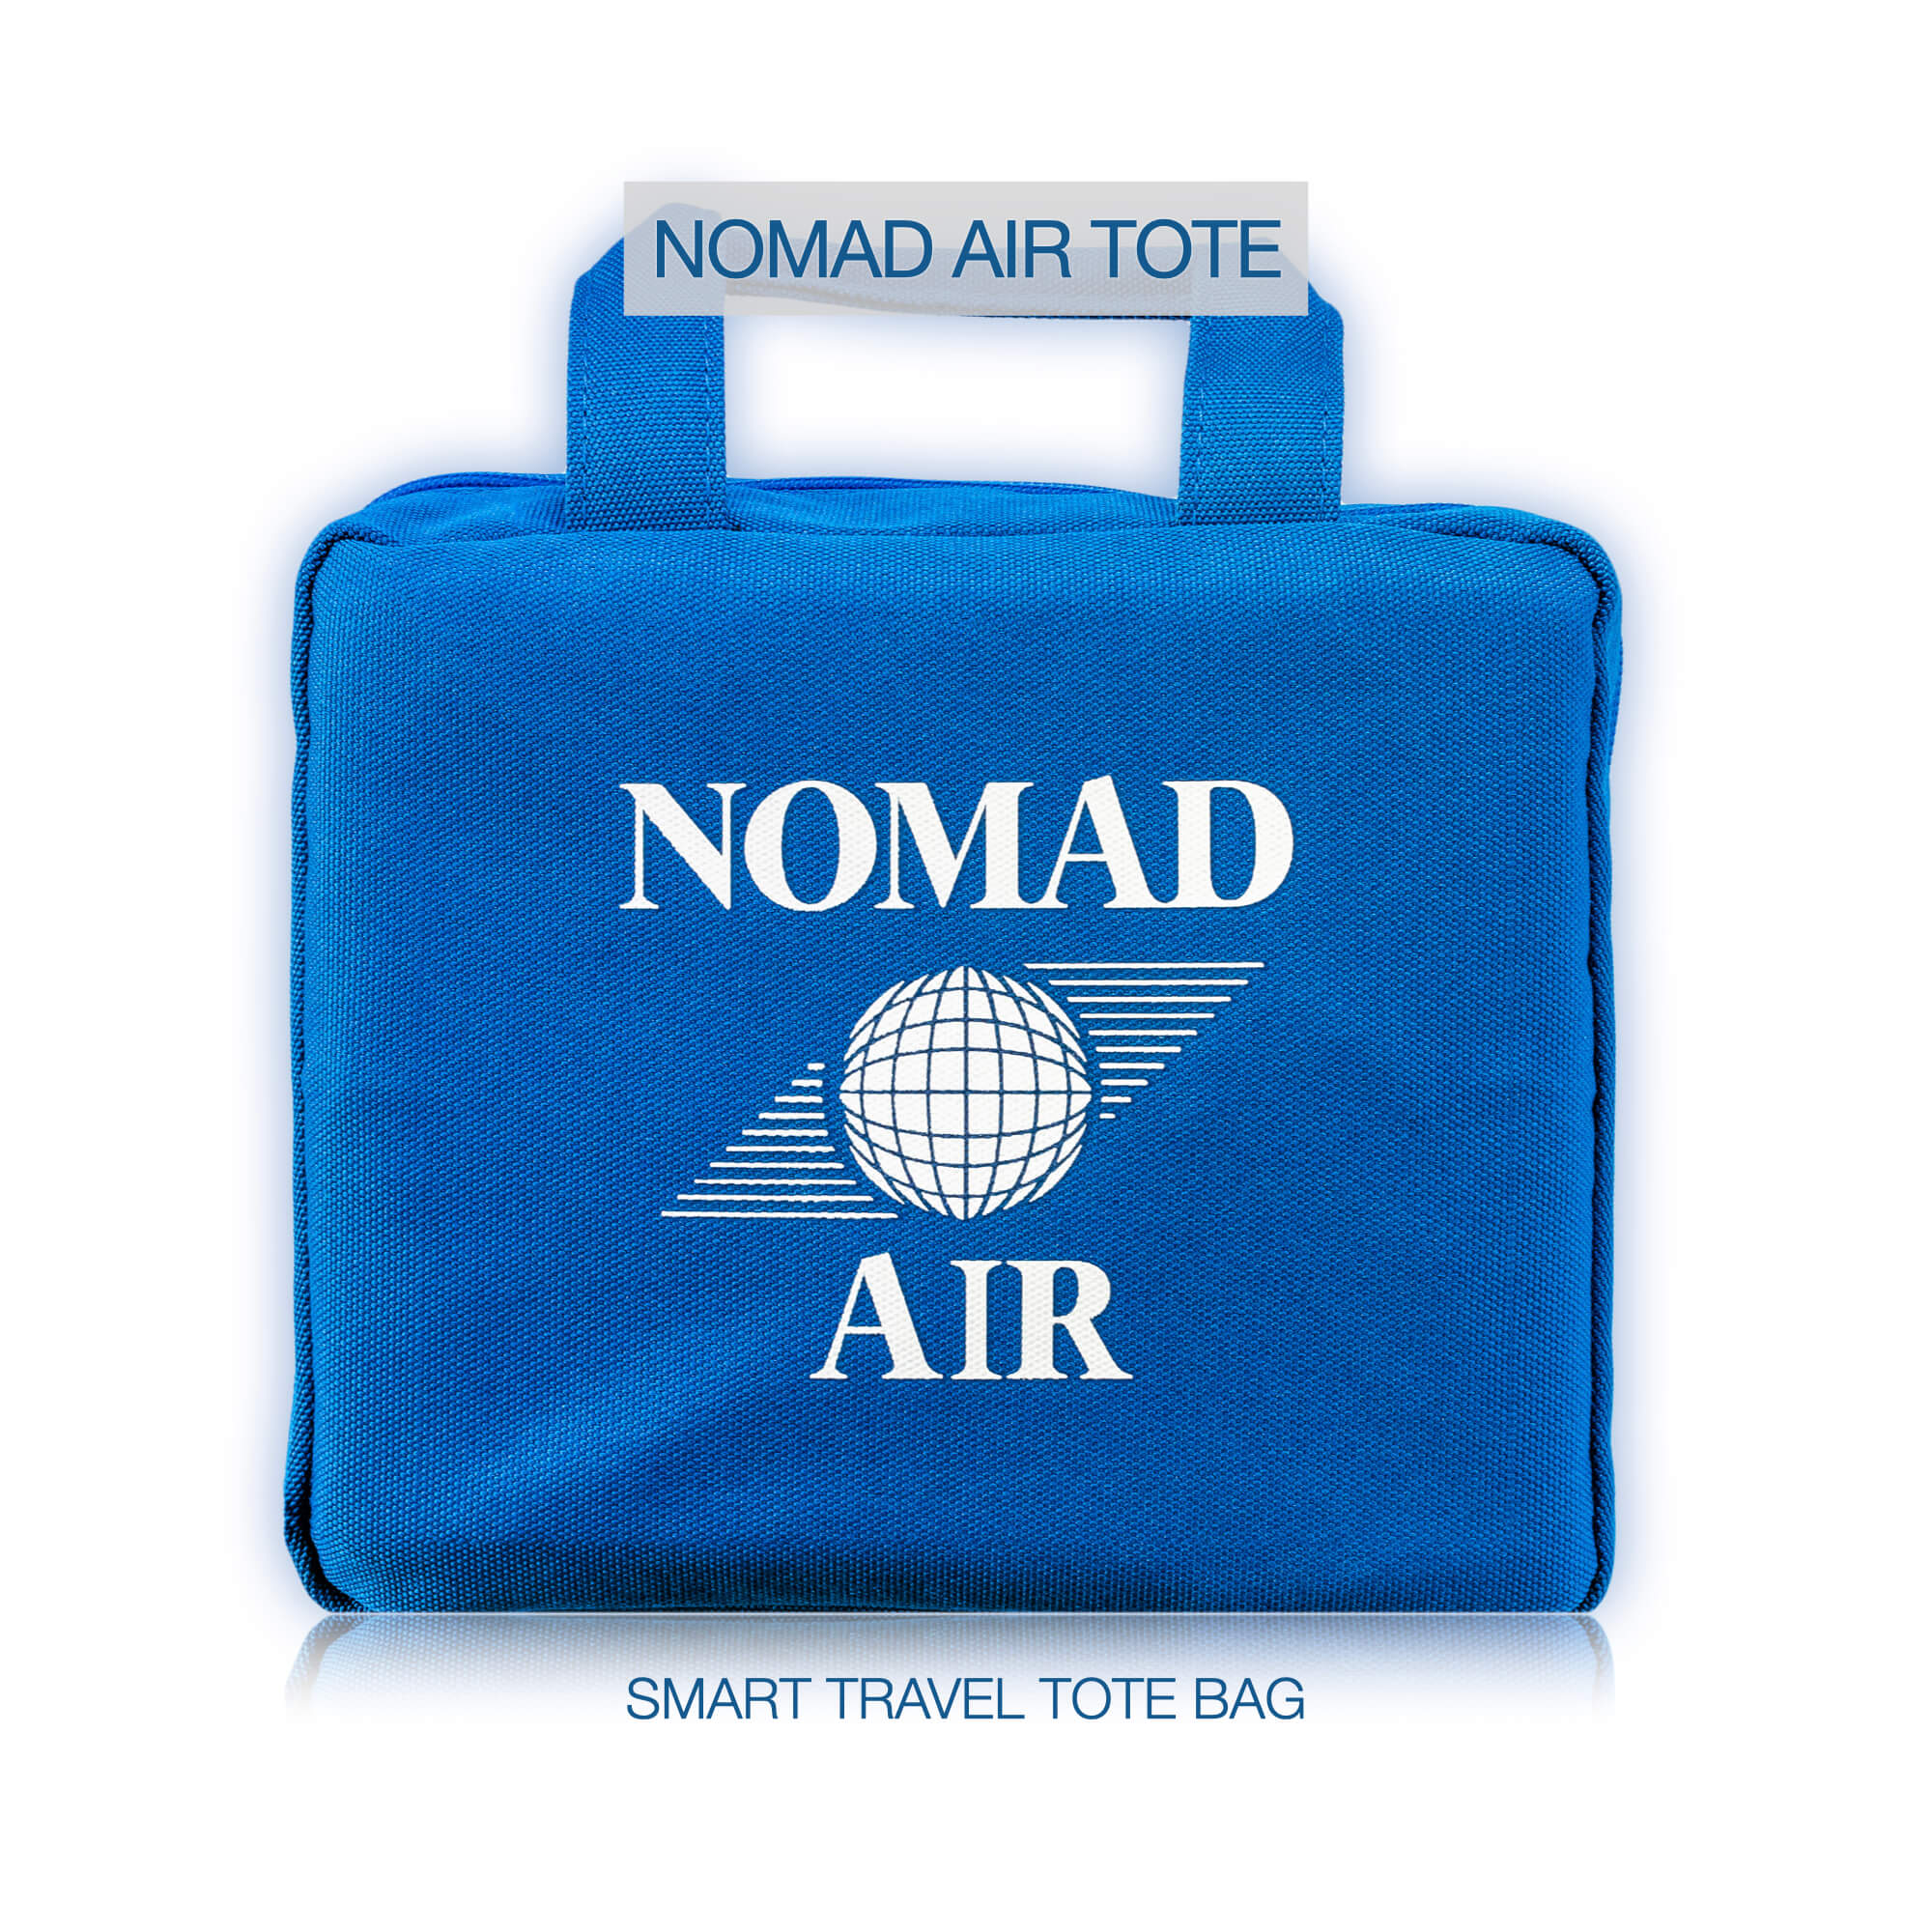 NOMAD Air - Travel Palette Collection & Tote Bag